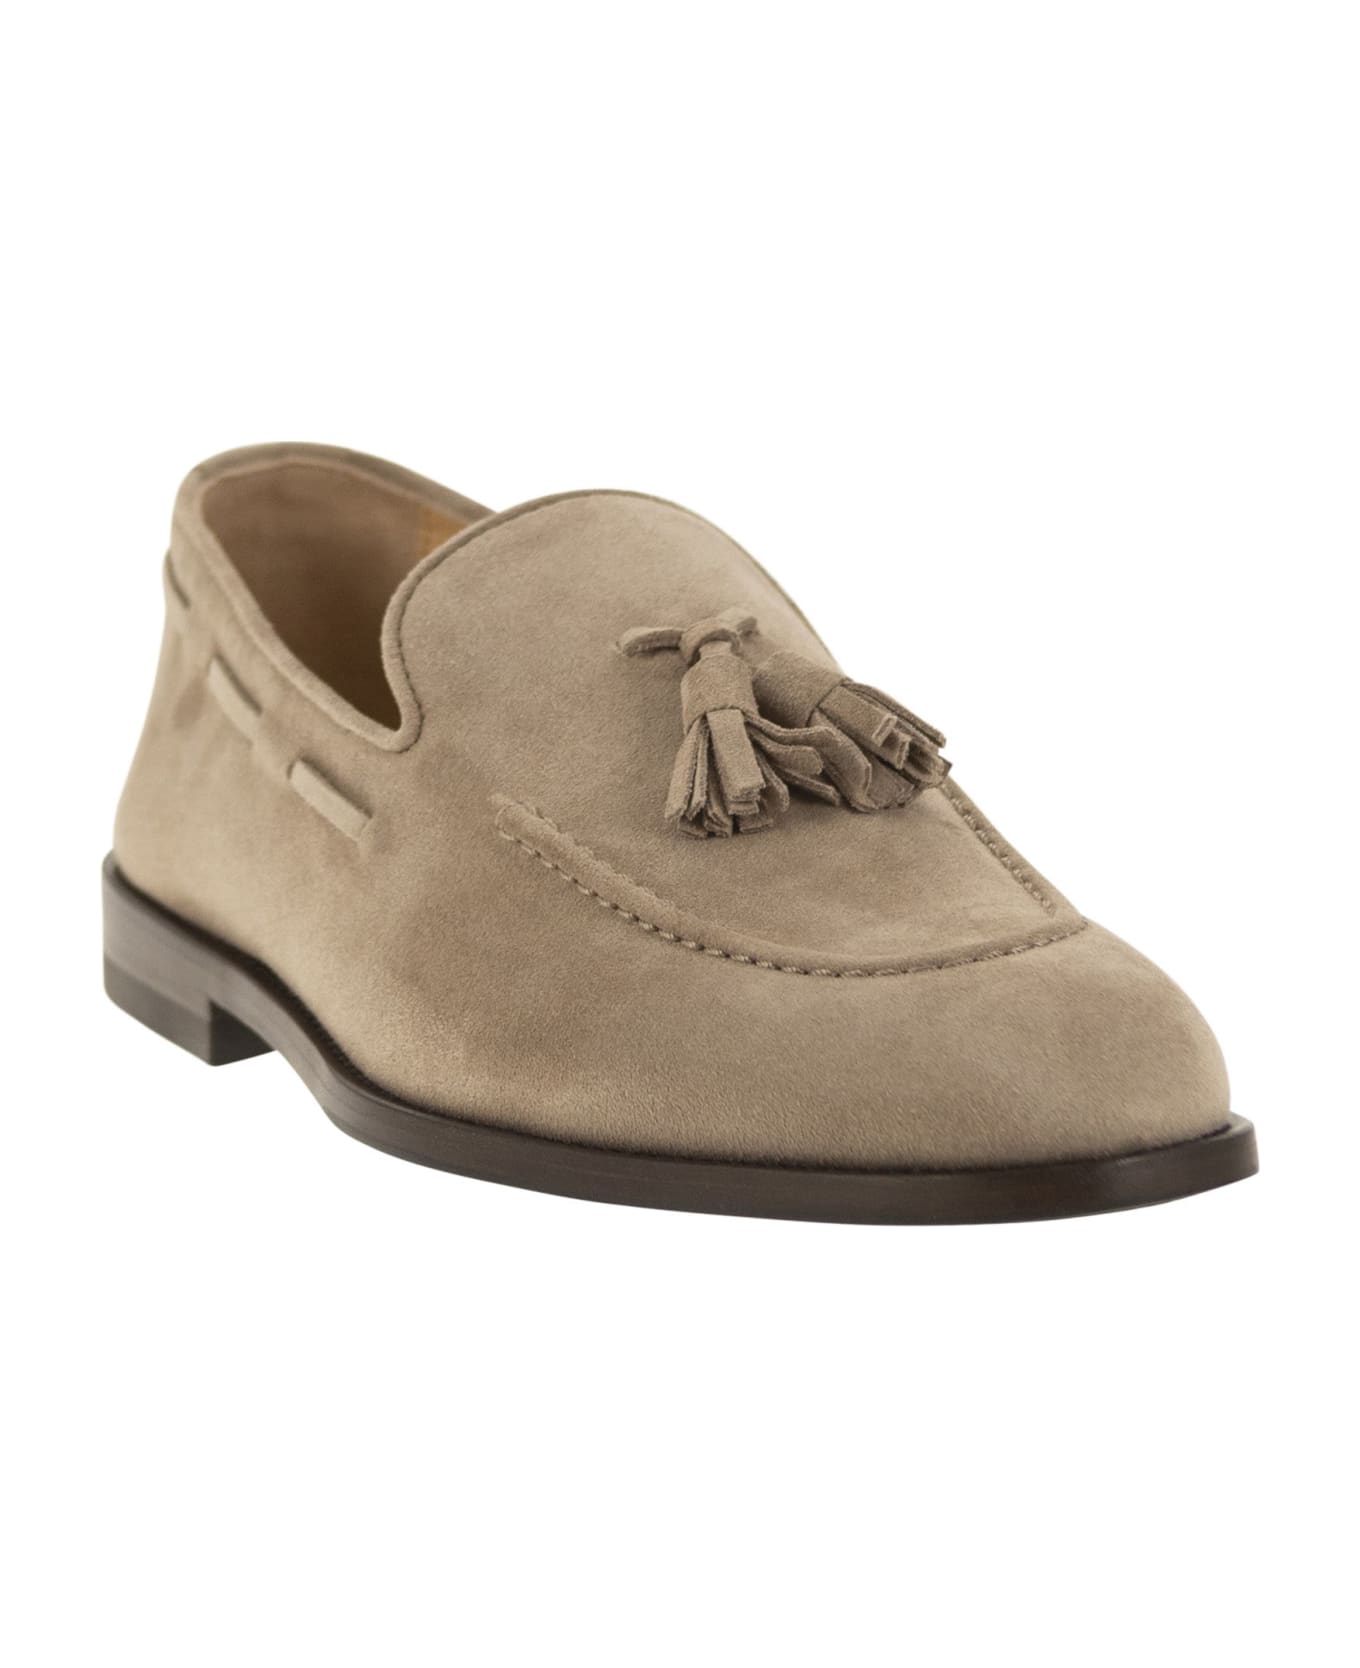 Brunello Cucinelli Suede Moccasins With Tassels - Rope